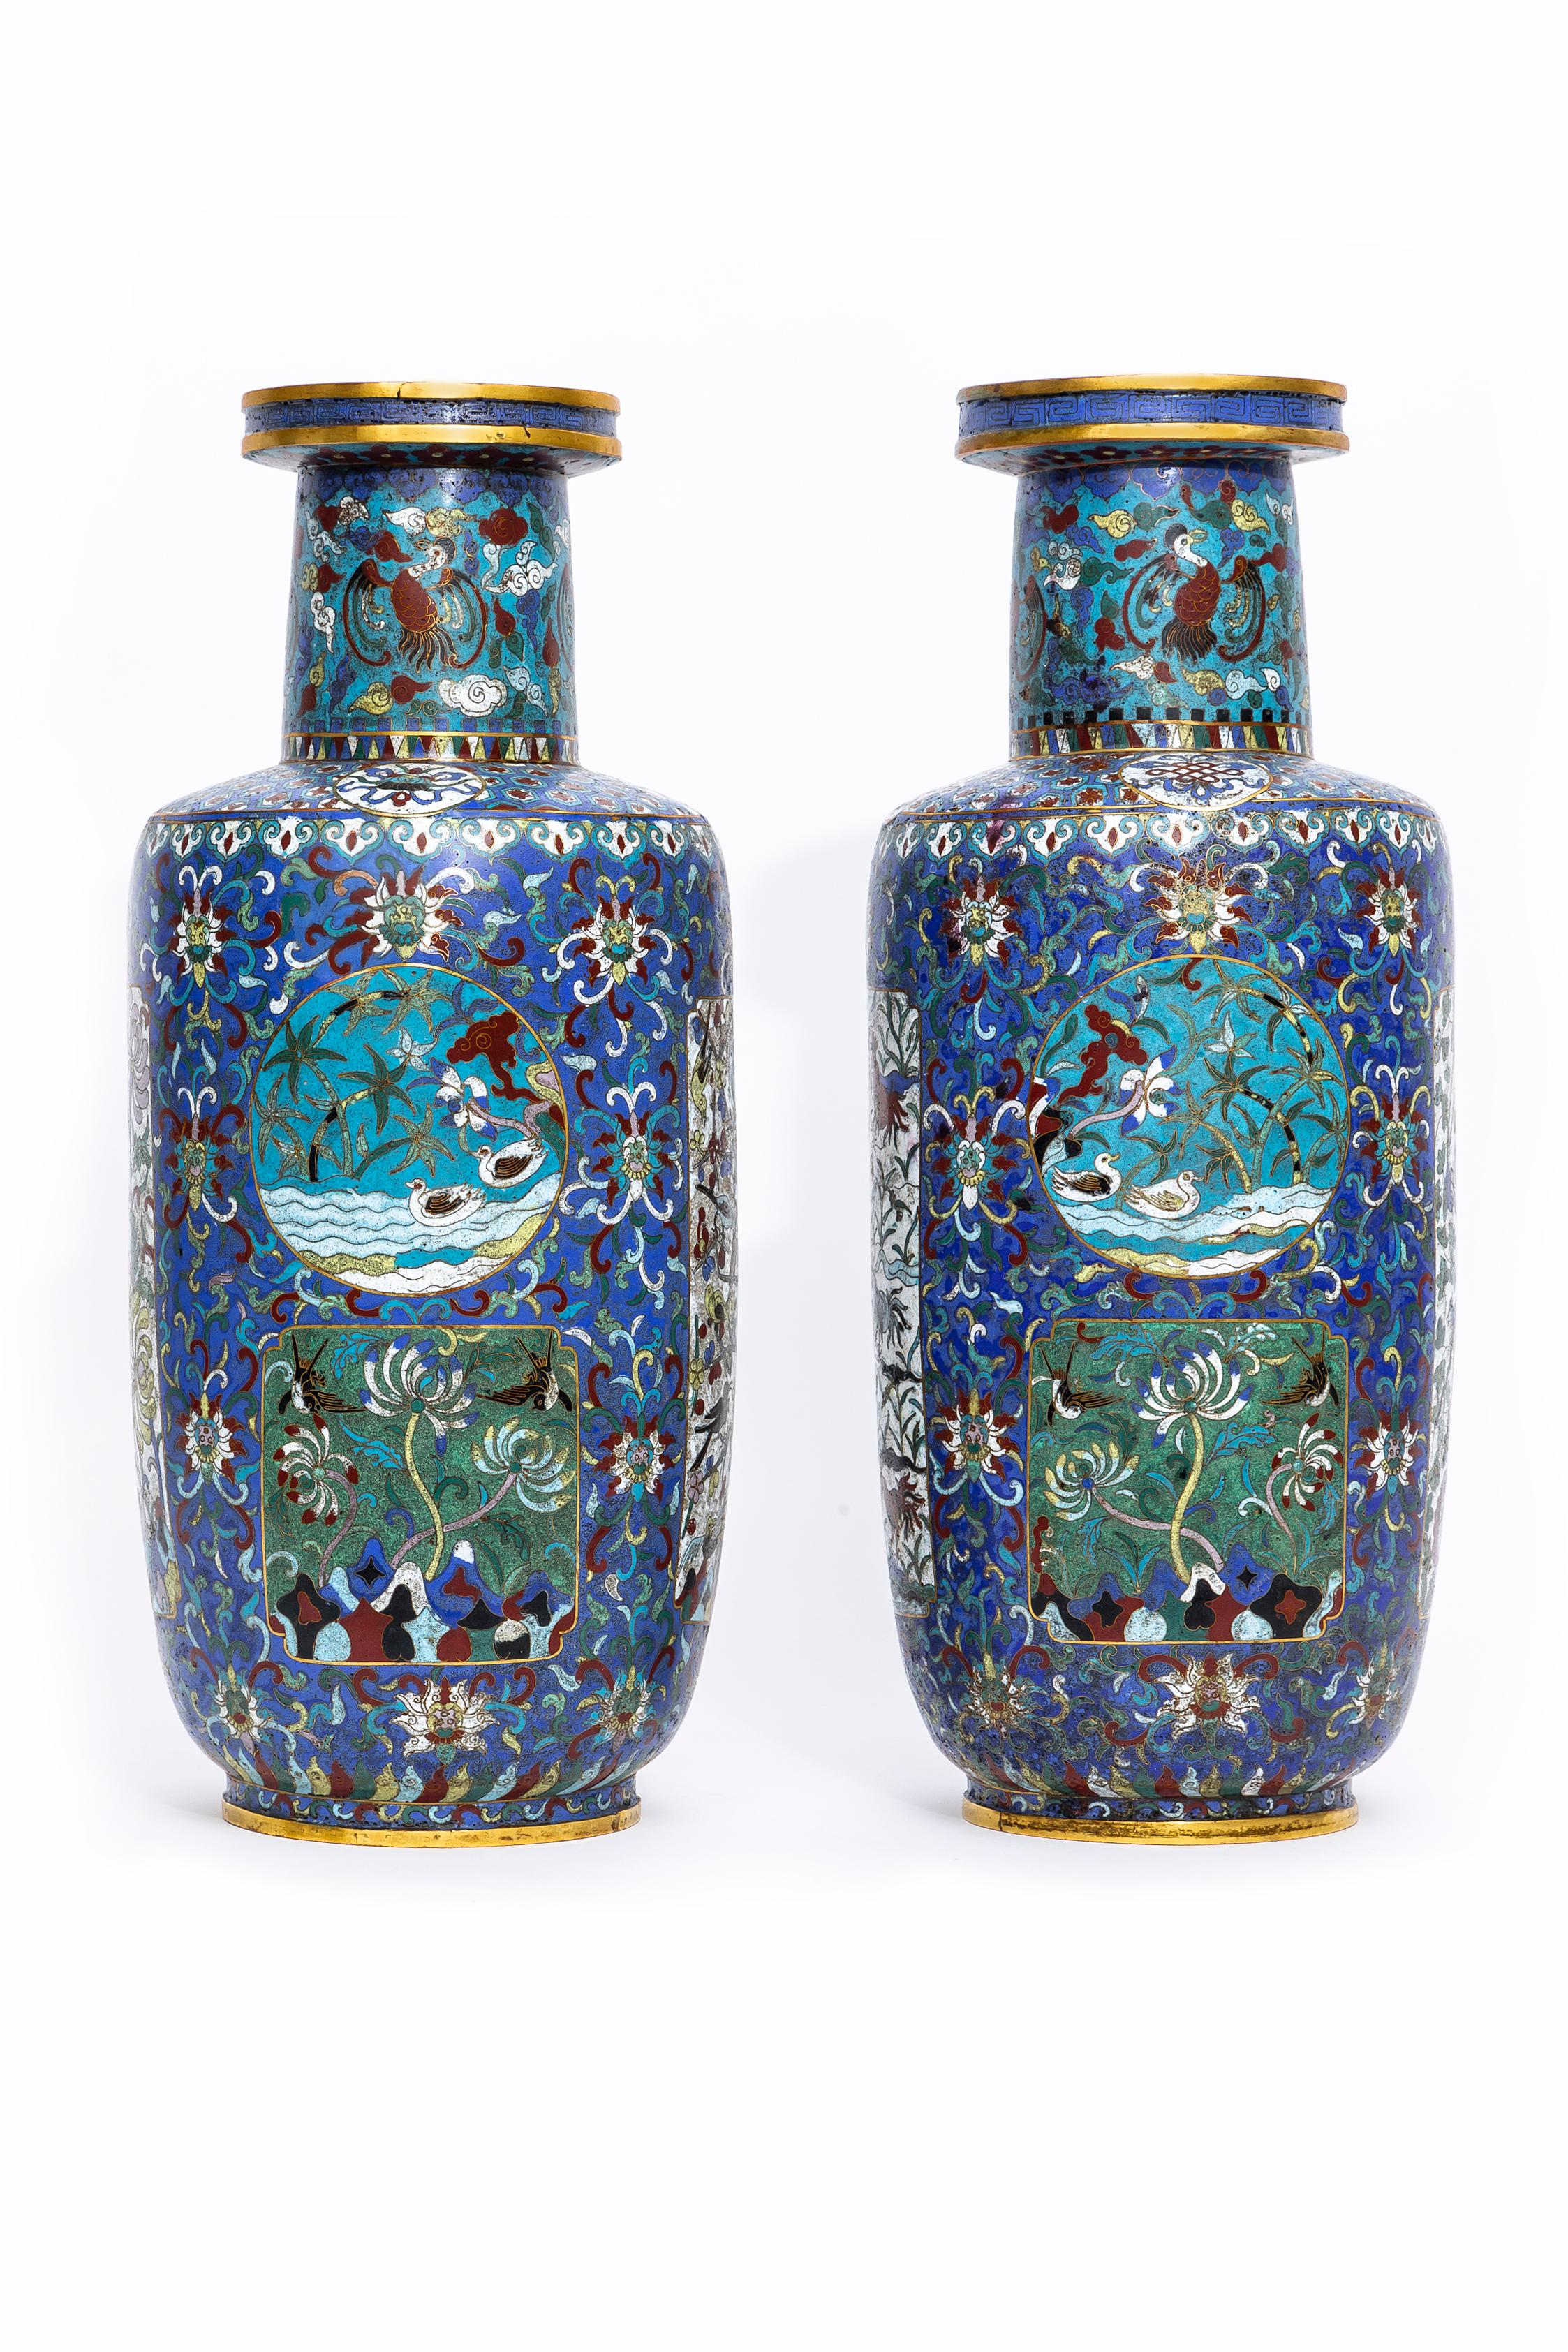 19th Century Pair Chinese 19th C. Qing Dynasty, Cloisonne Multi-Cartouche Vases from Museum For Sale